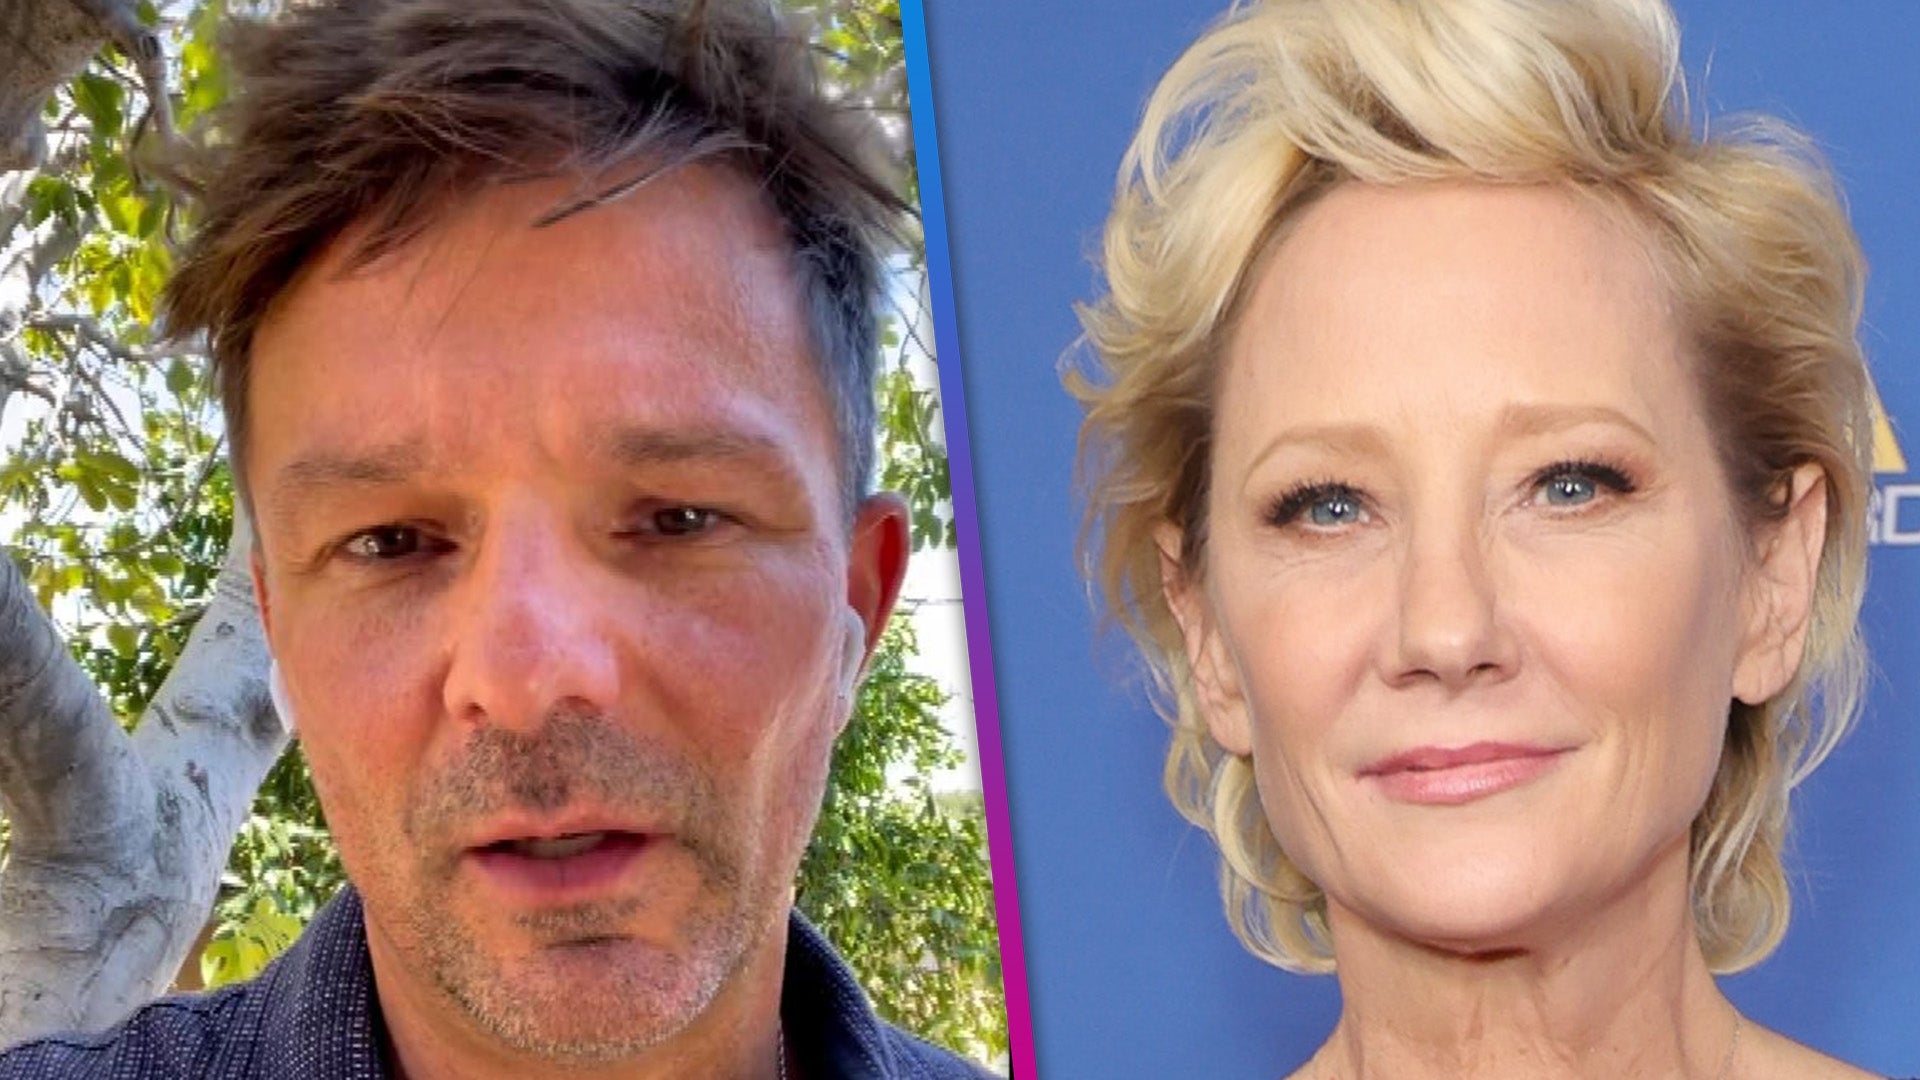 Anne Heche’s Ex Coley Laffoon Reflects on Her Death in Emotional Video